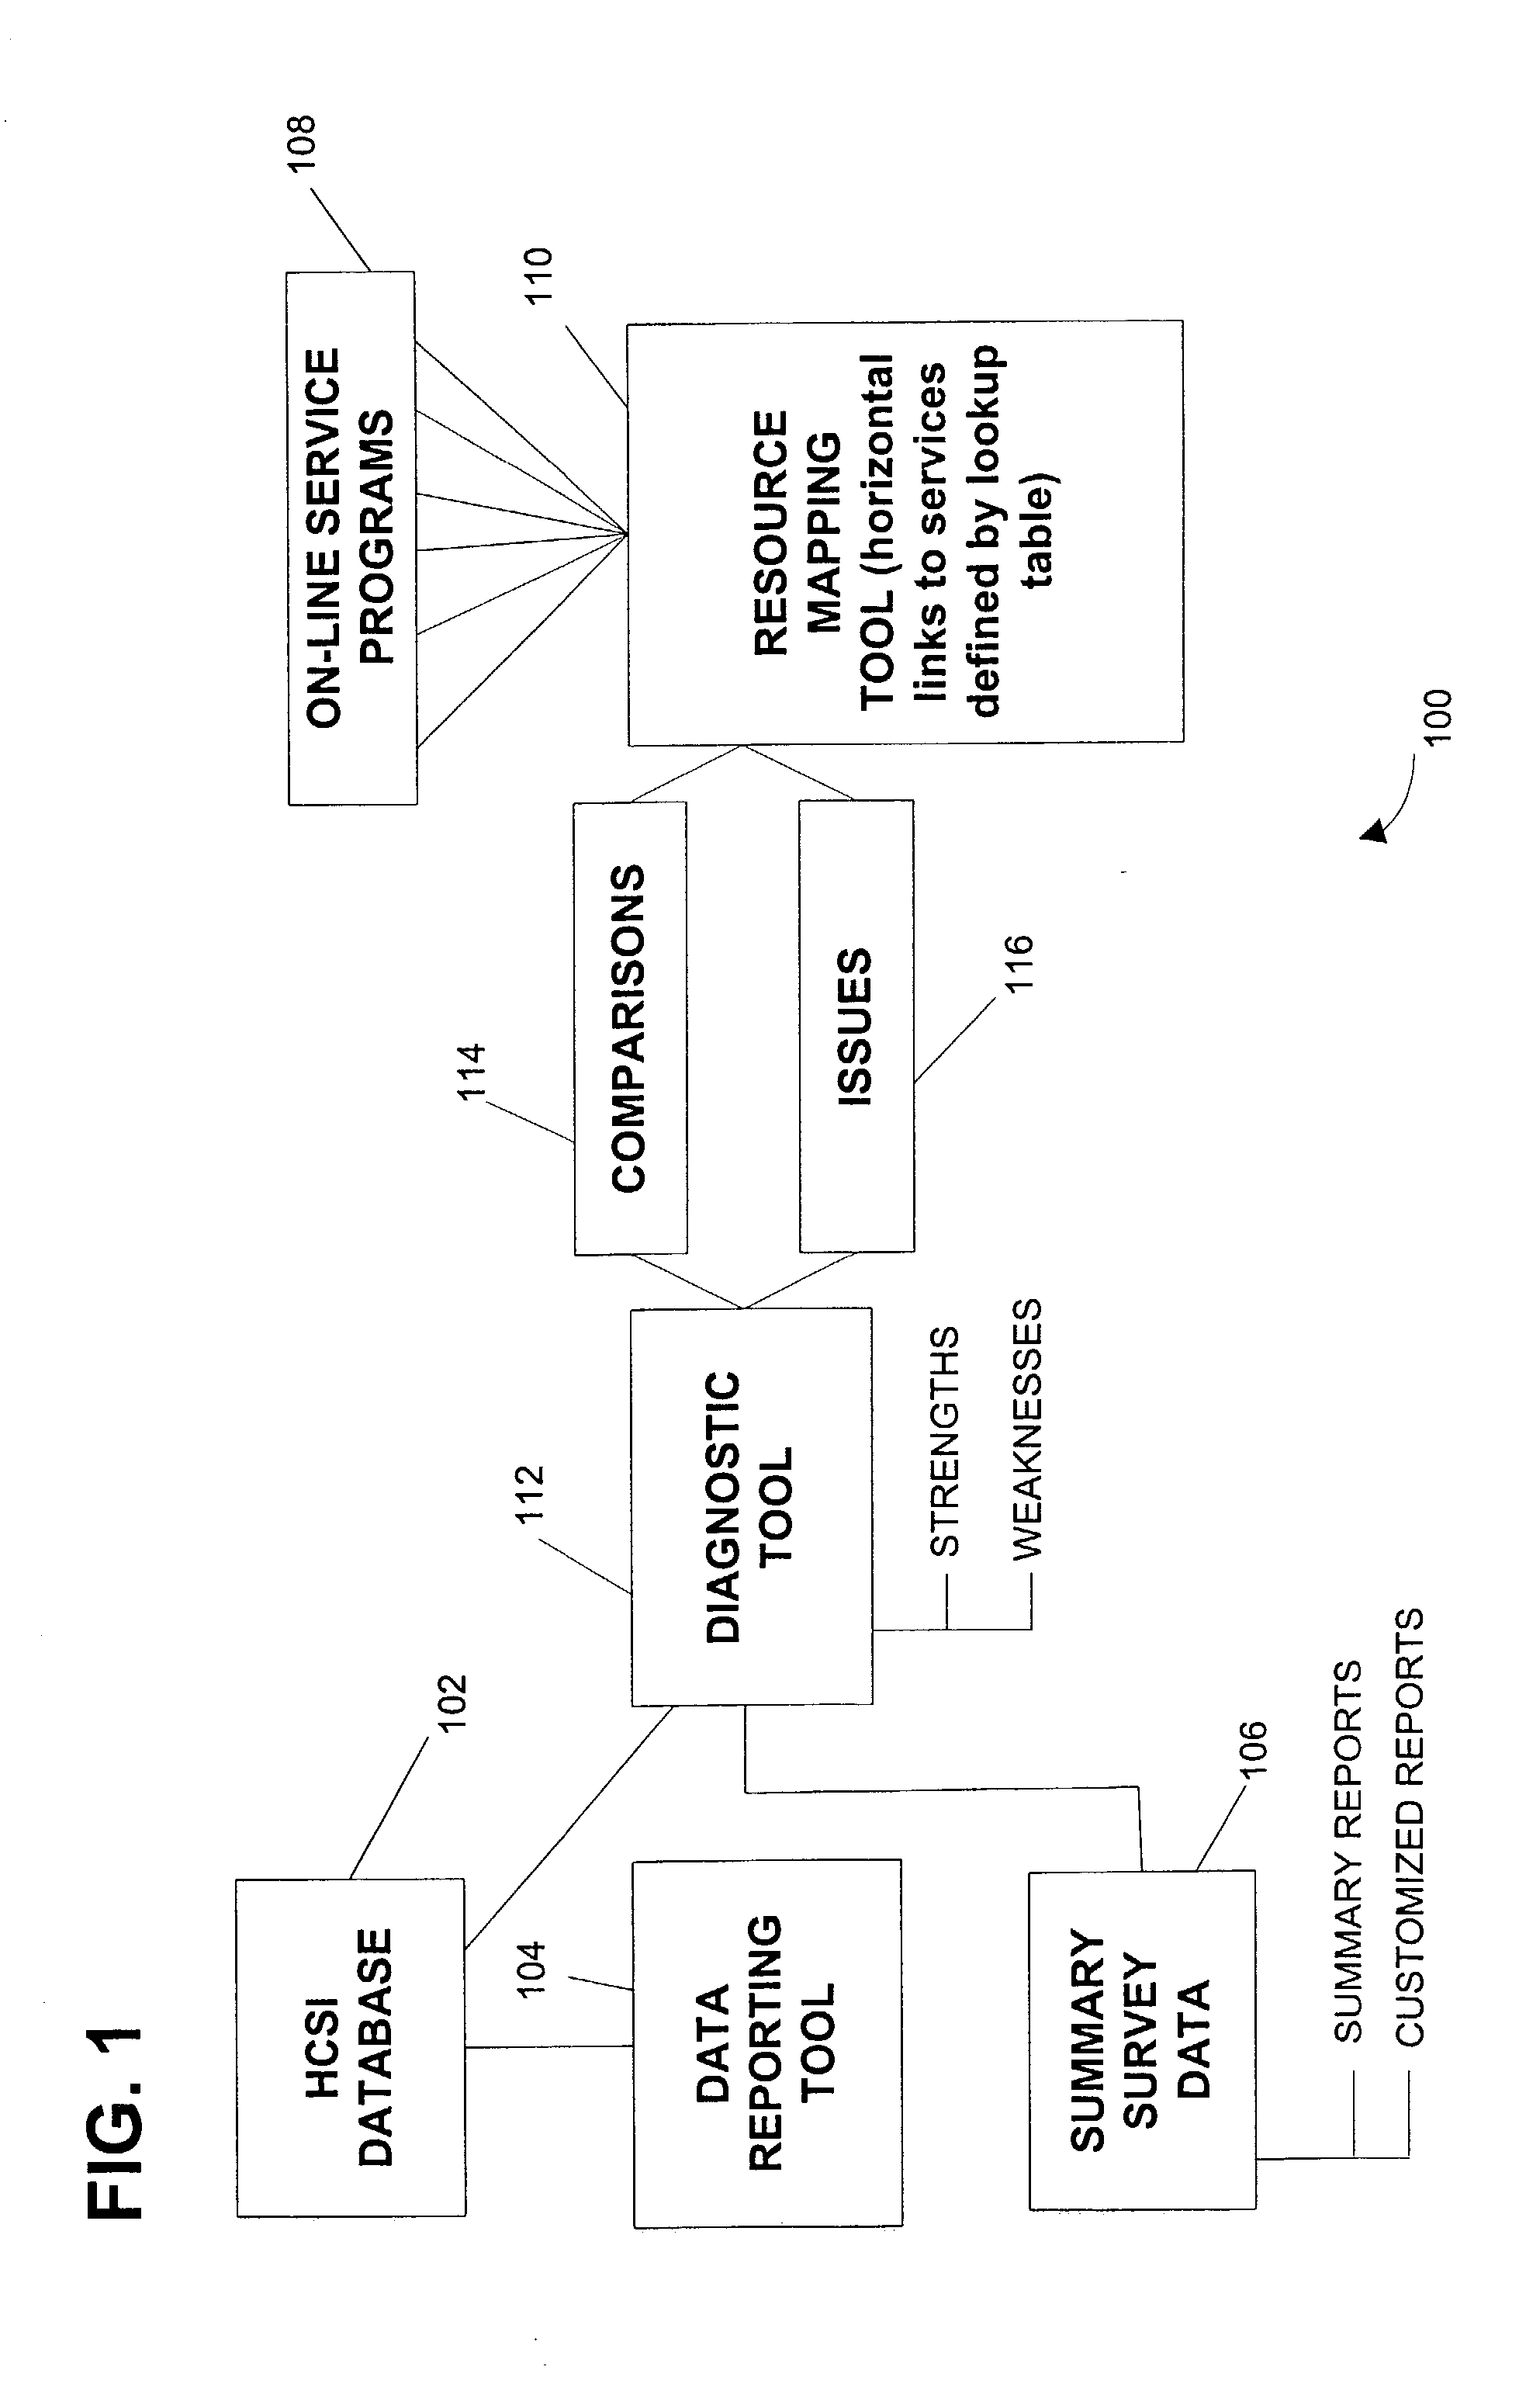 System and method for addressing a performance improvement cycle of a business